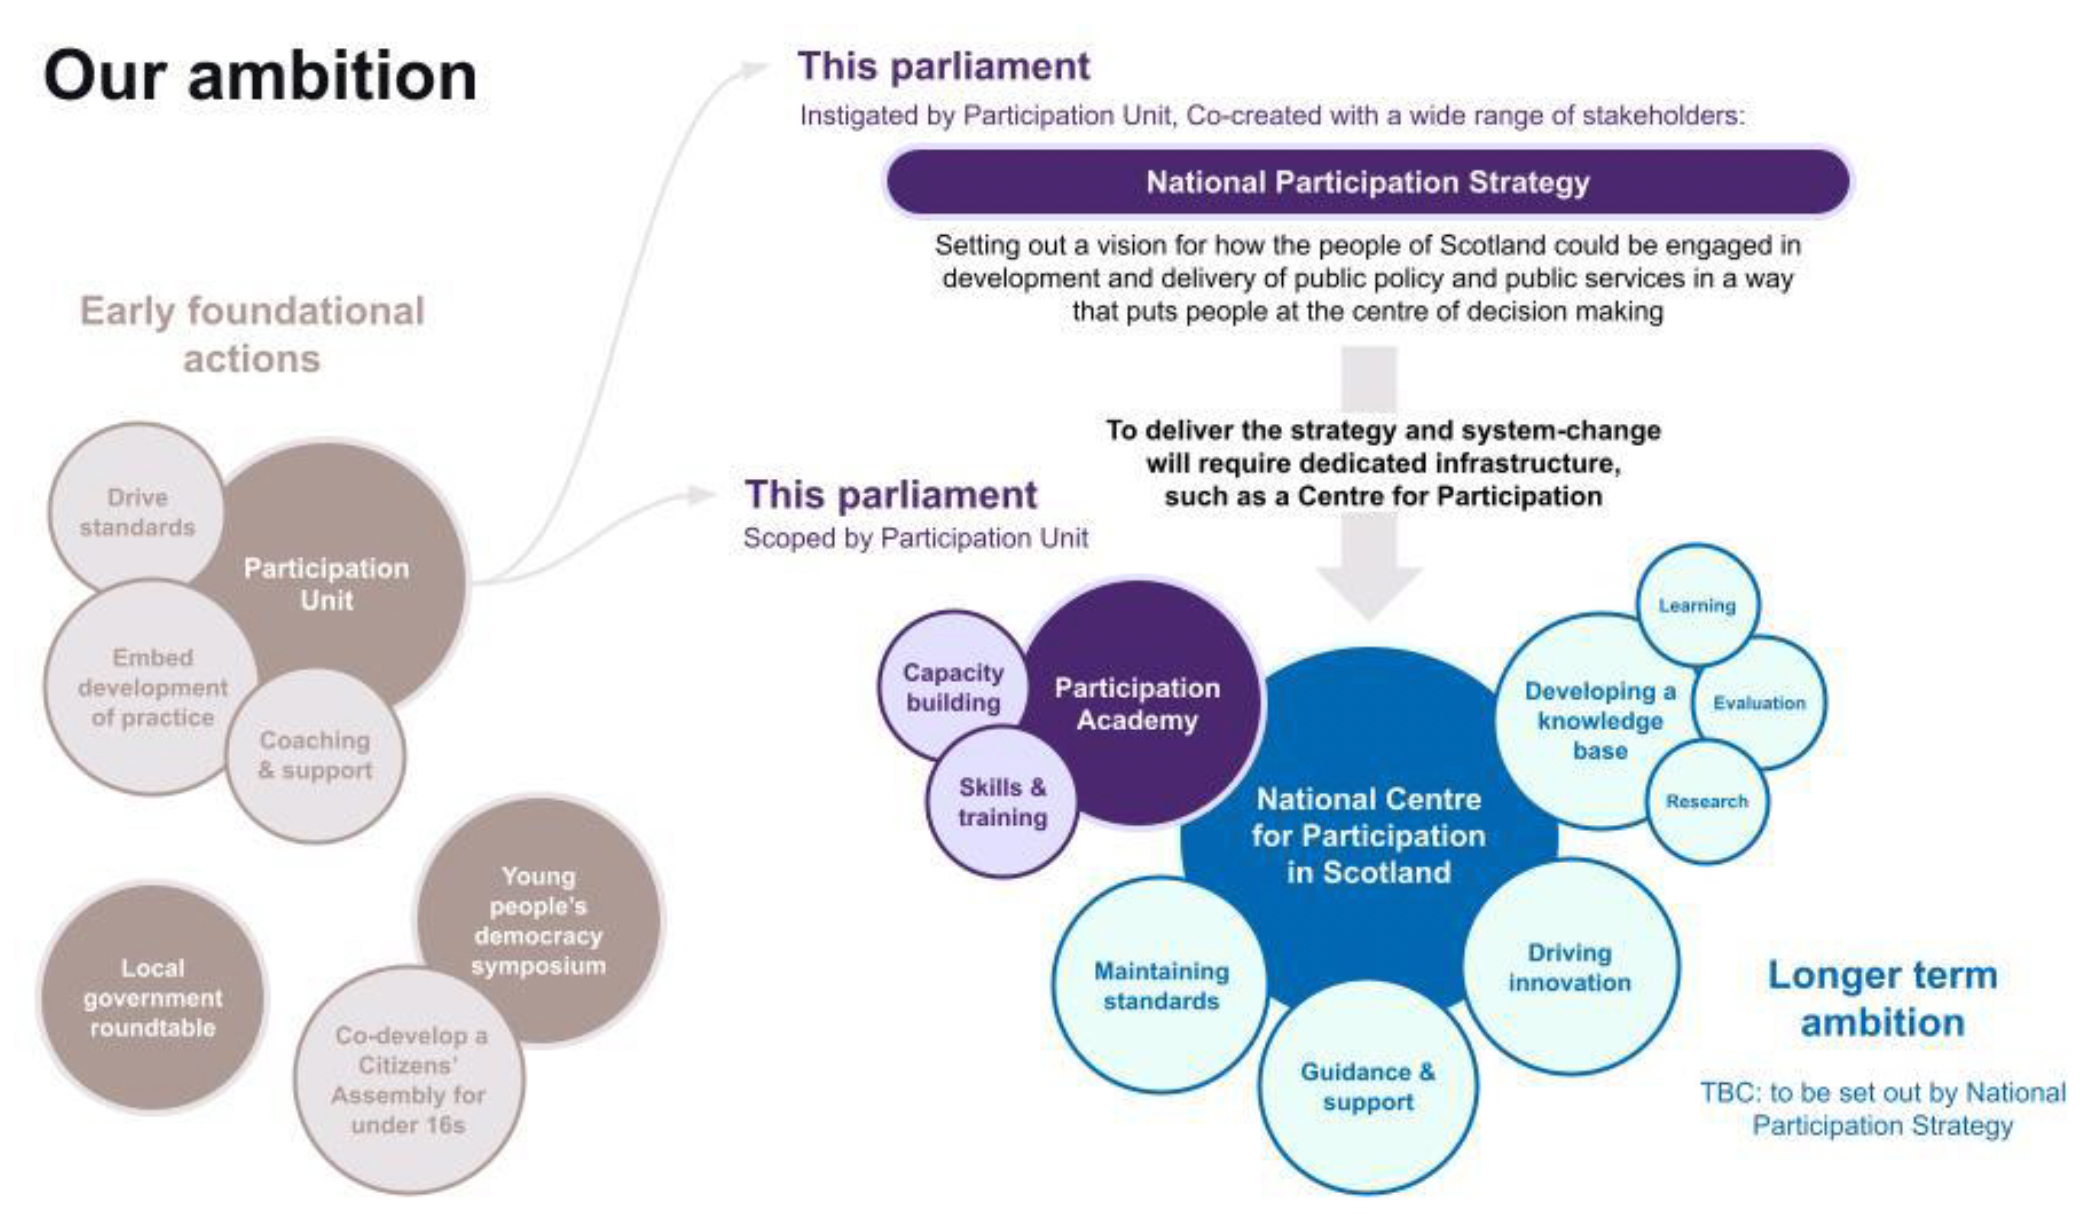 A set of bubbles in a chronological flow chart showing how the recommendations can develop to institutionalise participatory democracy